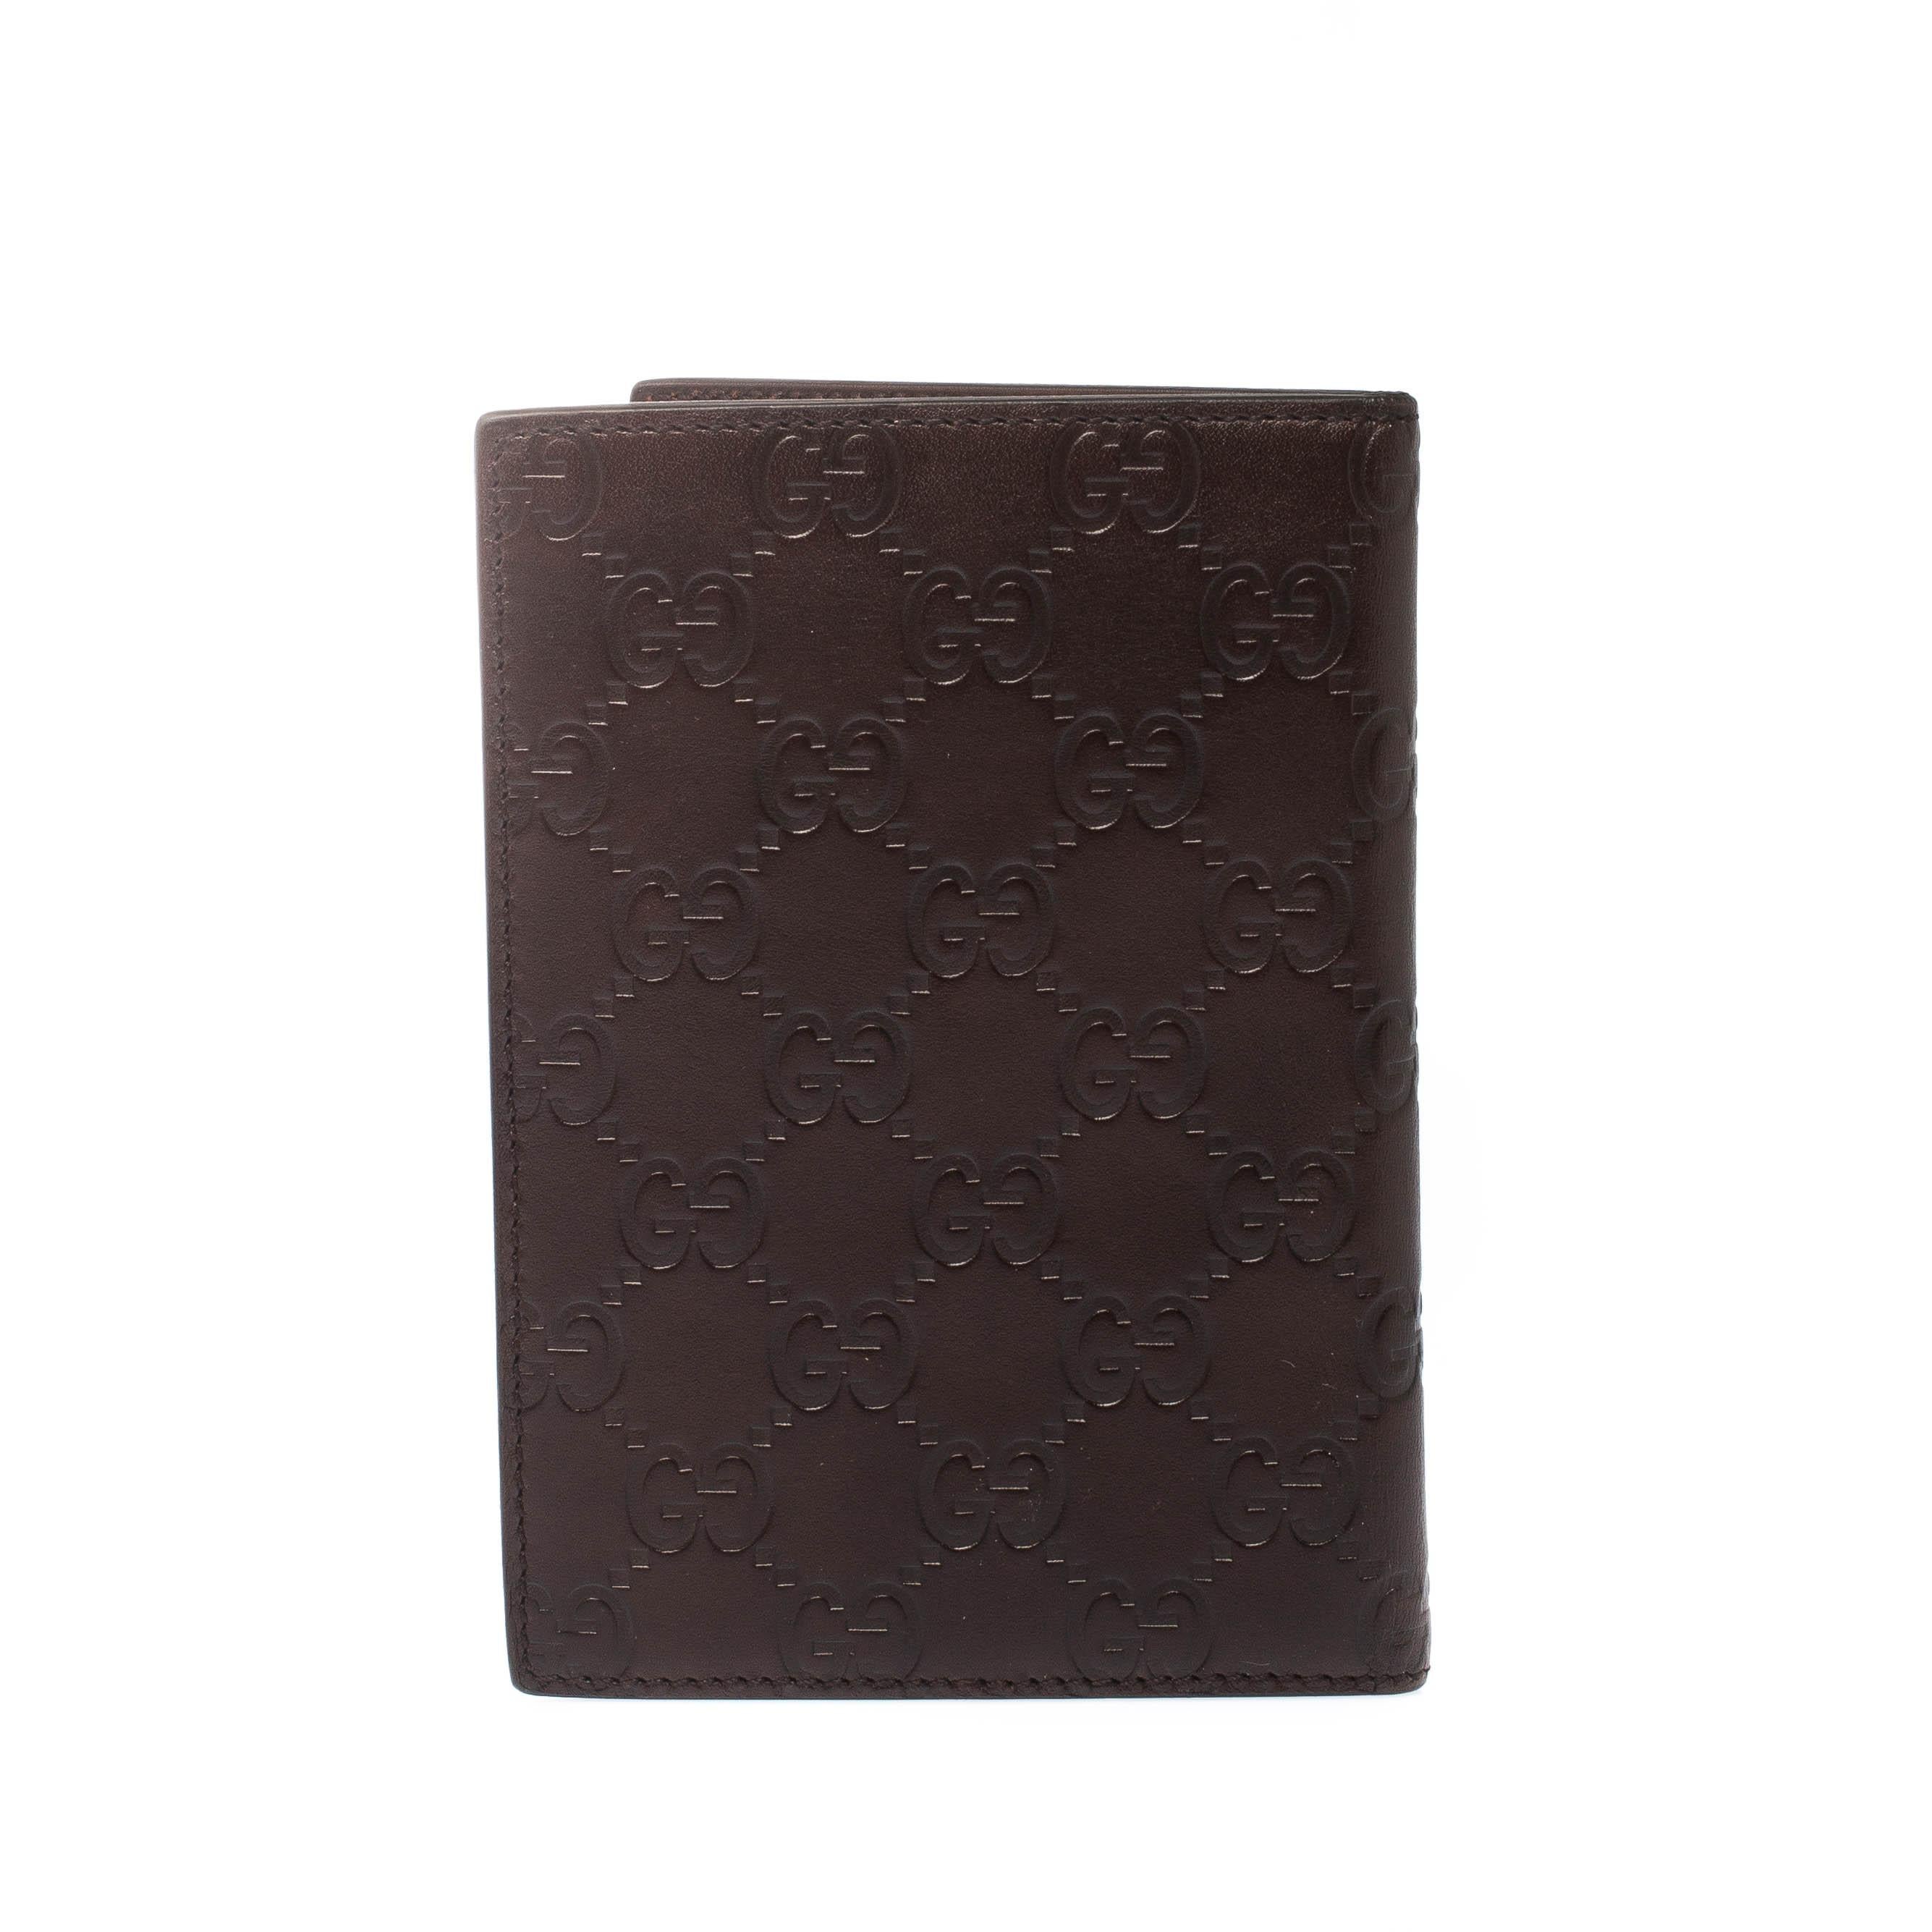 Crafted using brown Guccissima leather, this travel frame holder by Gucci has been styled as a bifold with interior slots that will dutifully hold your travel documents. This piece is handy and can easily be carried.

Includes: Original Box,